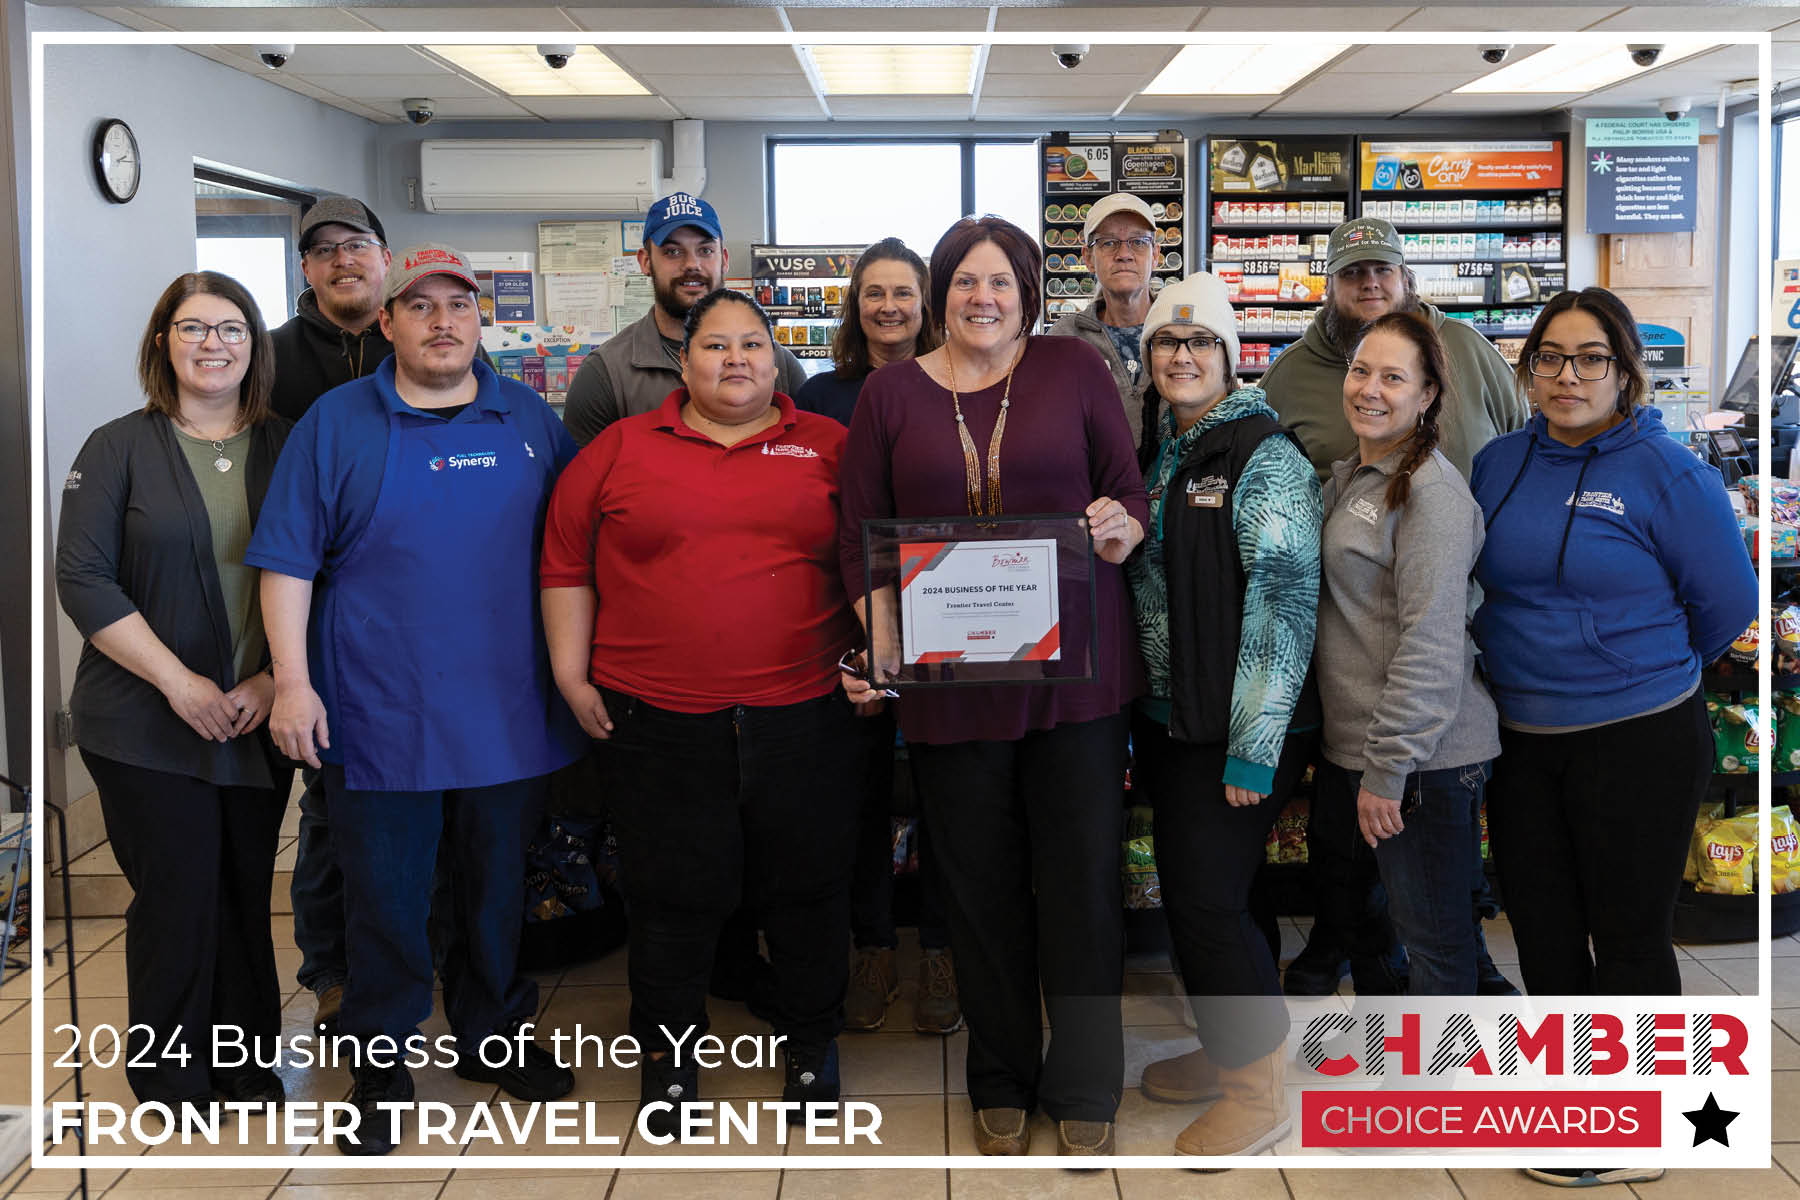 2024 Business of the Year - Frontier Travel Center, Bowman, ND